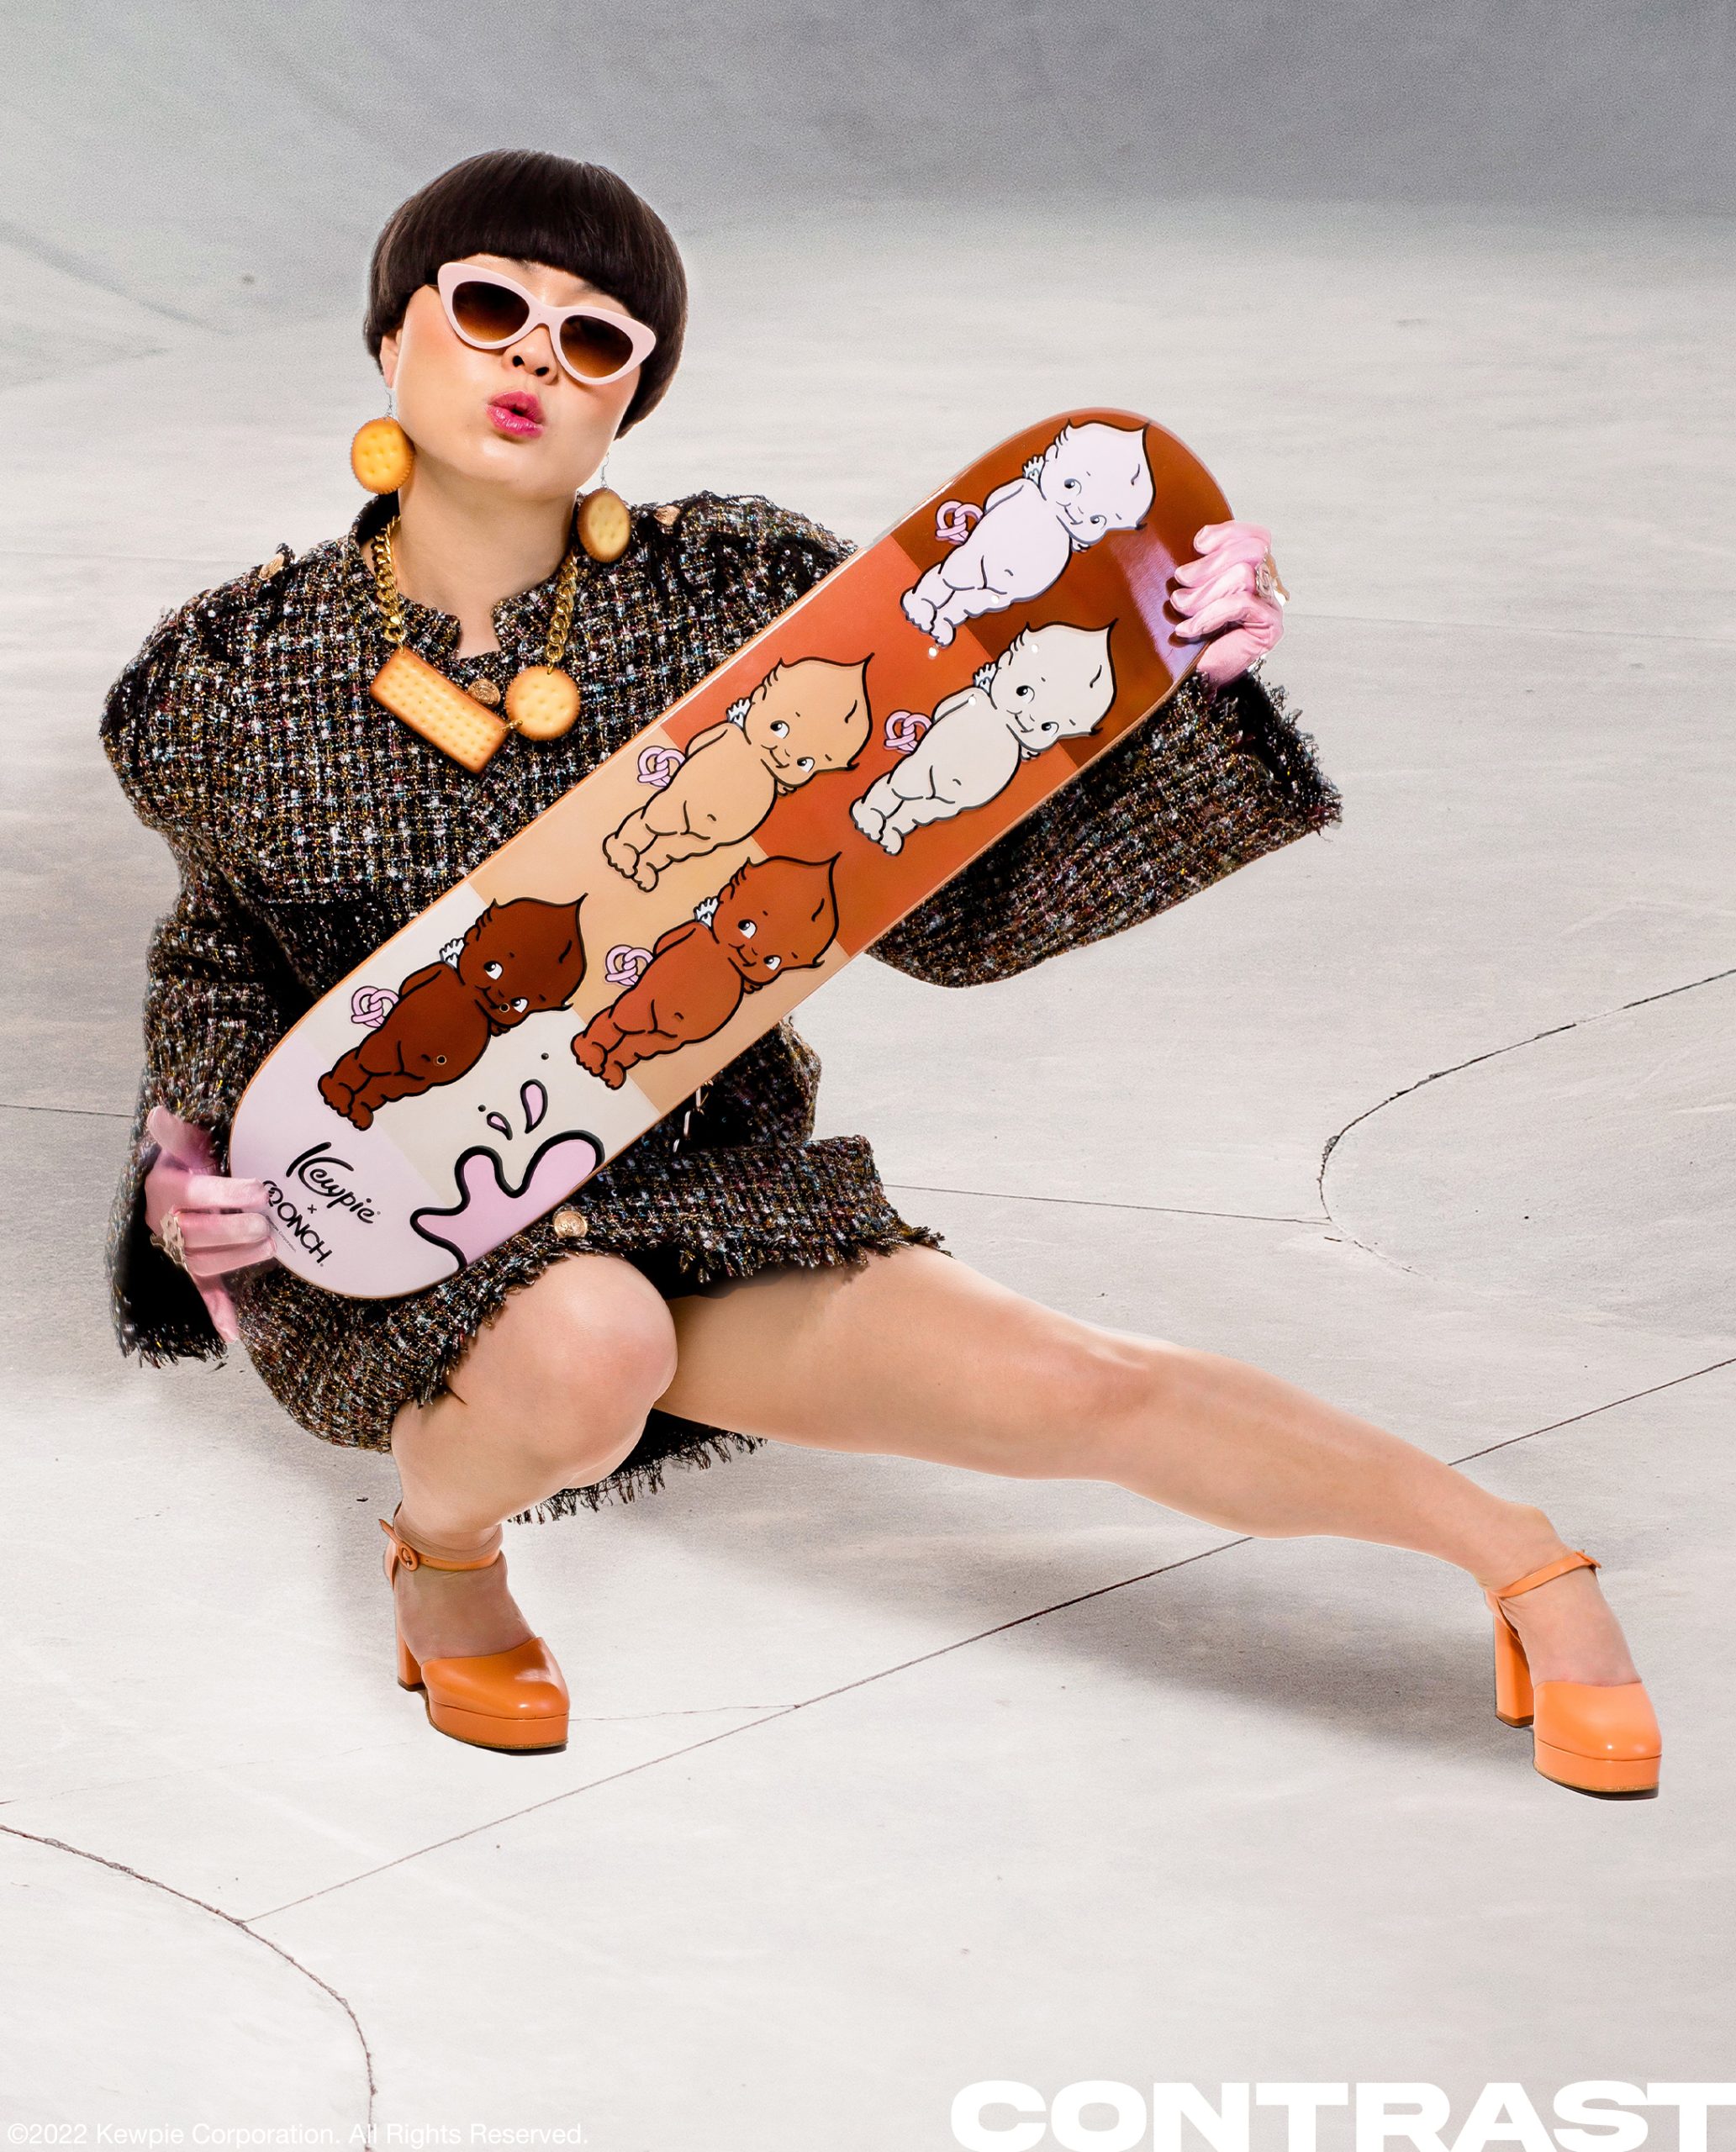 Comedian and HBO Max star Atsuko Okastuko poses in a black jacket and orange retro strap on heels while holding an ONCH and Kewpie skateboard deck in the middle of a skateboard park. The image features an illustrated light tone Kewpie doll character. This editorial was produced by ONCH, formerly known as Onch Movement. Atsuko is also wearing a cracker/cookie necklace designed by ONCH.